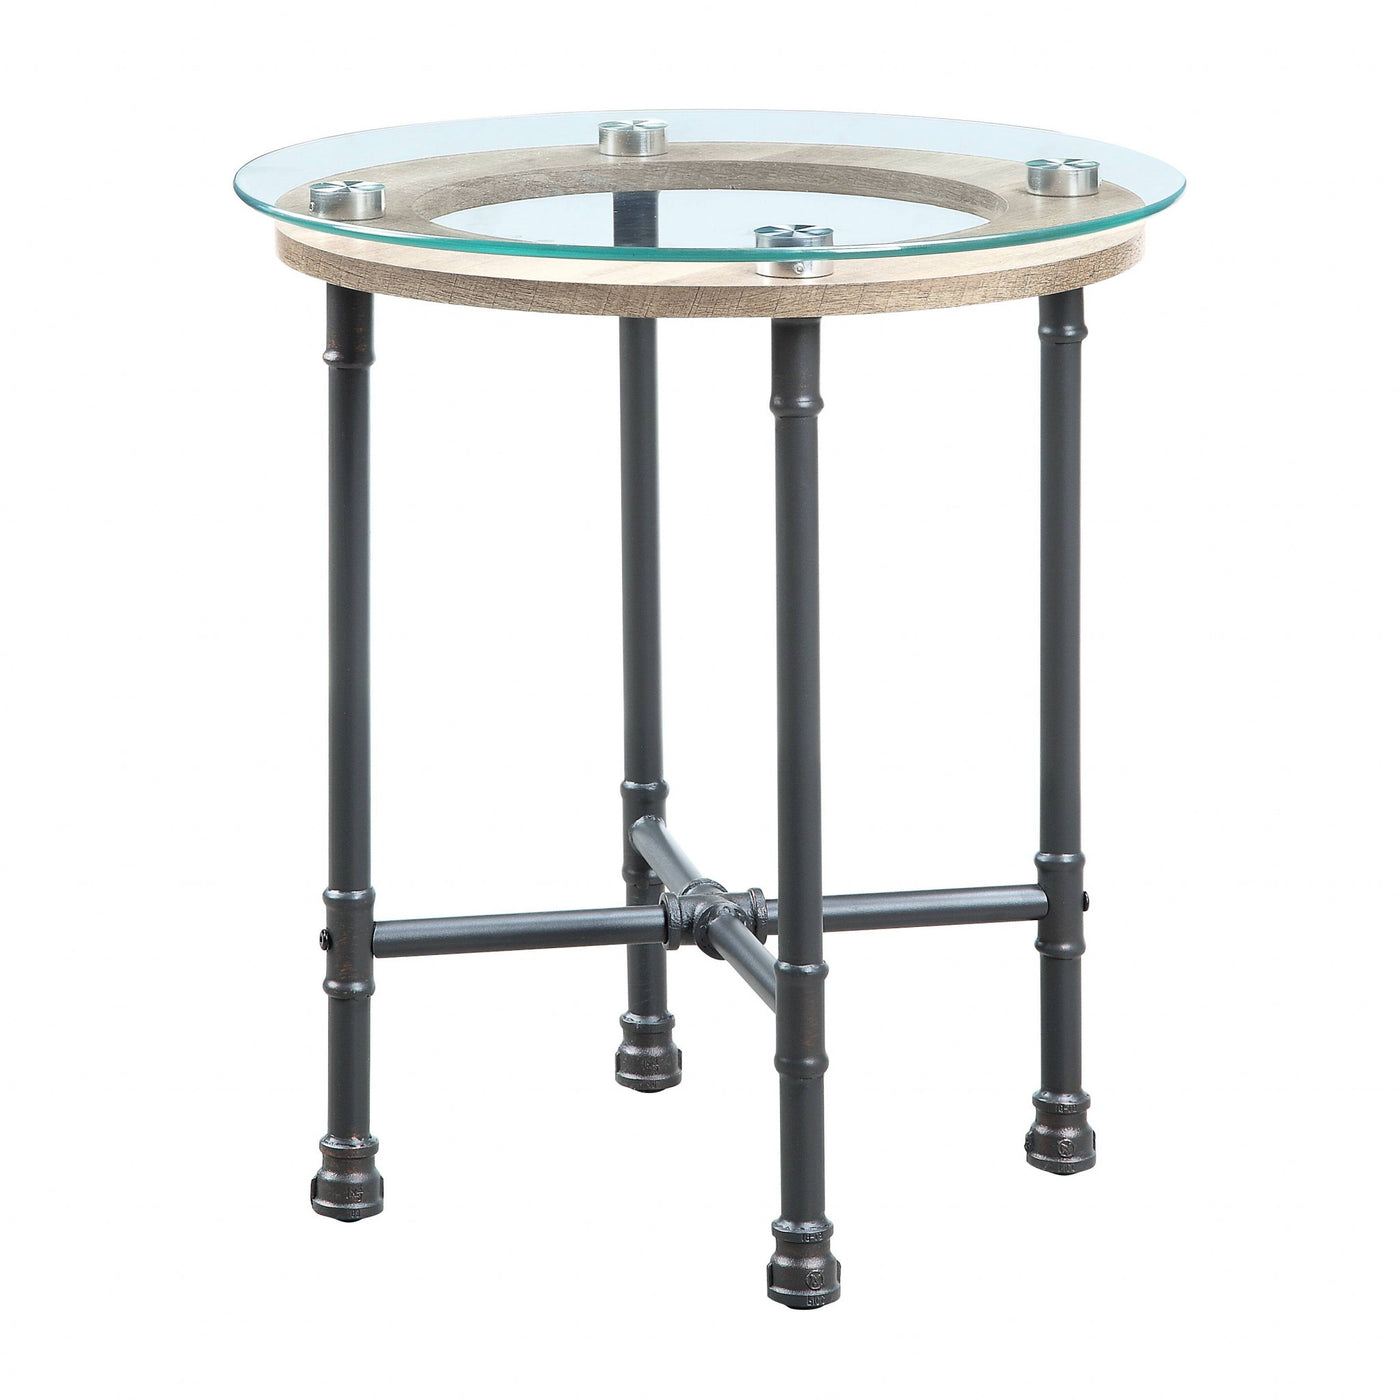 24" Sandy Gray And Clear Glass And Metal Round End Table